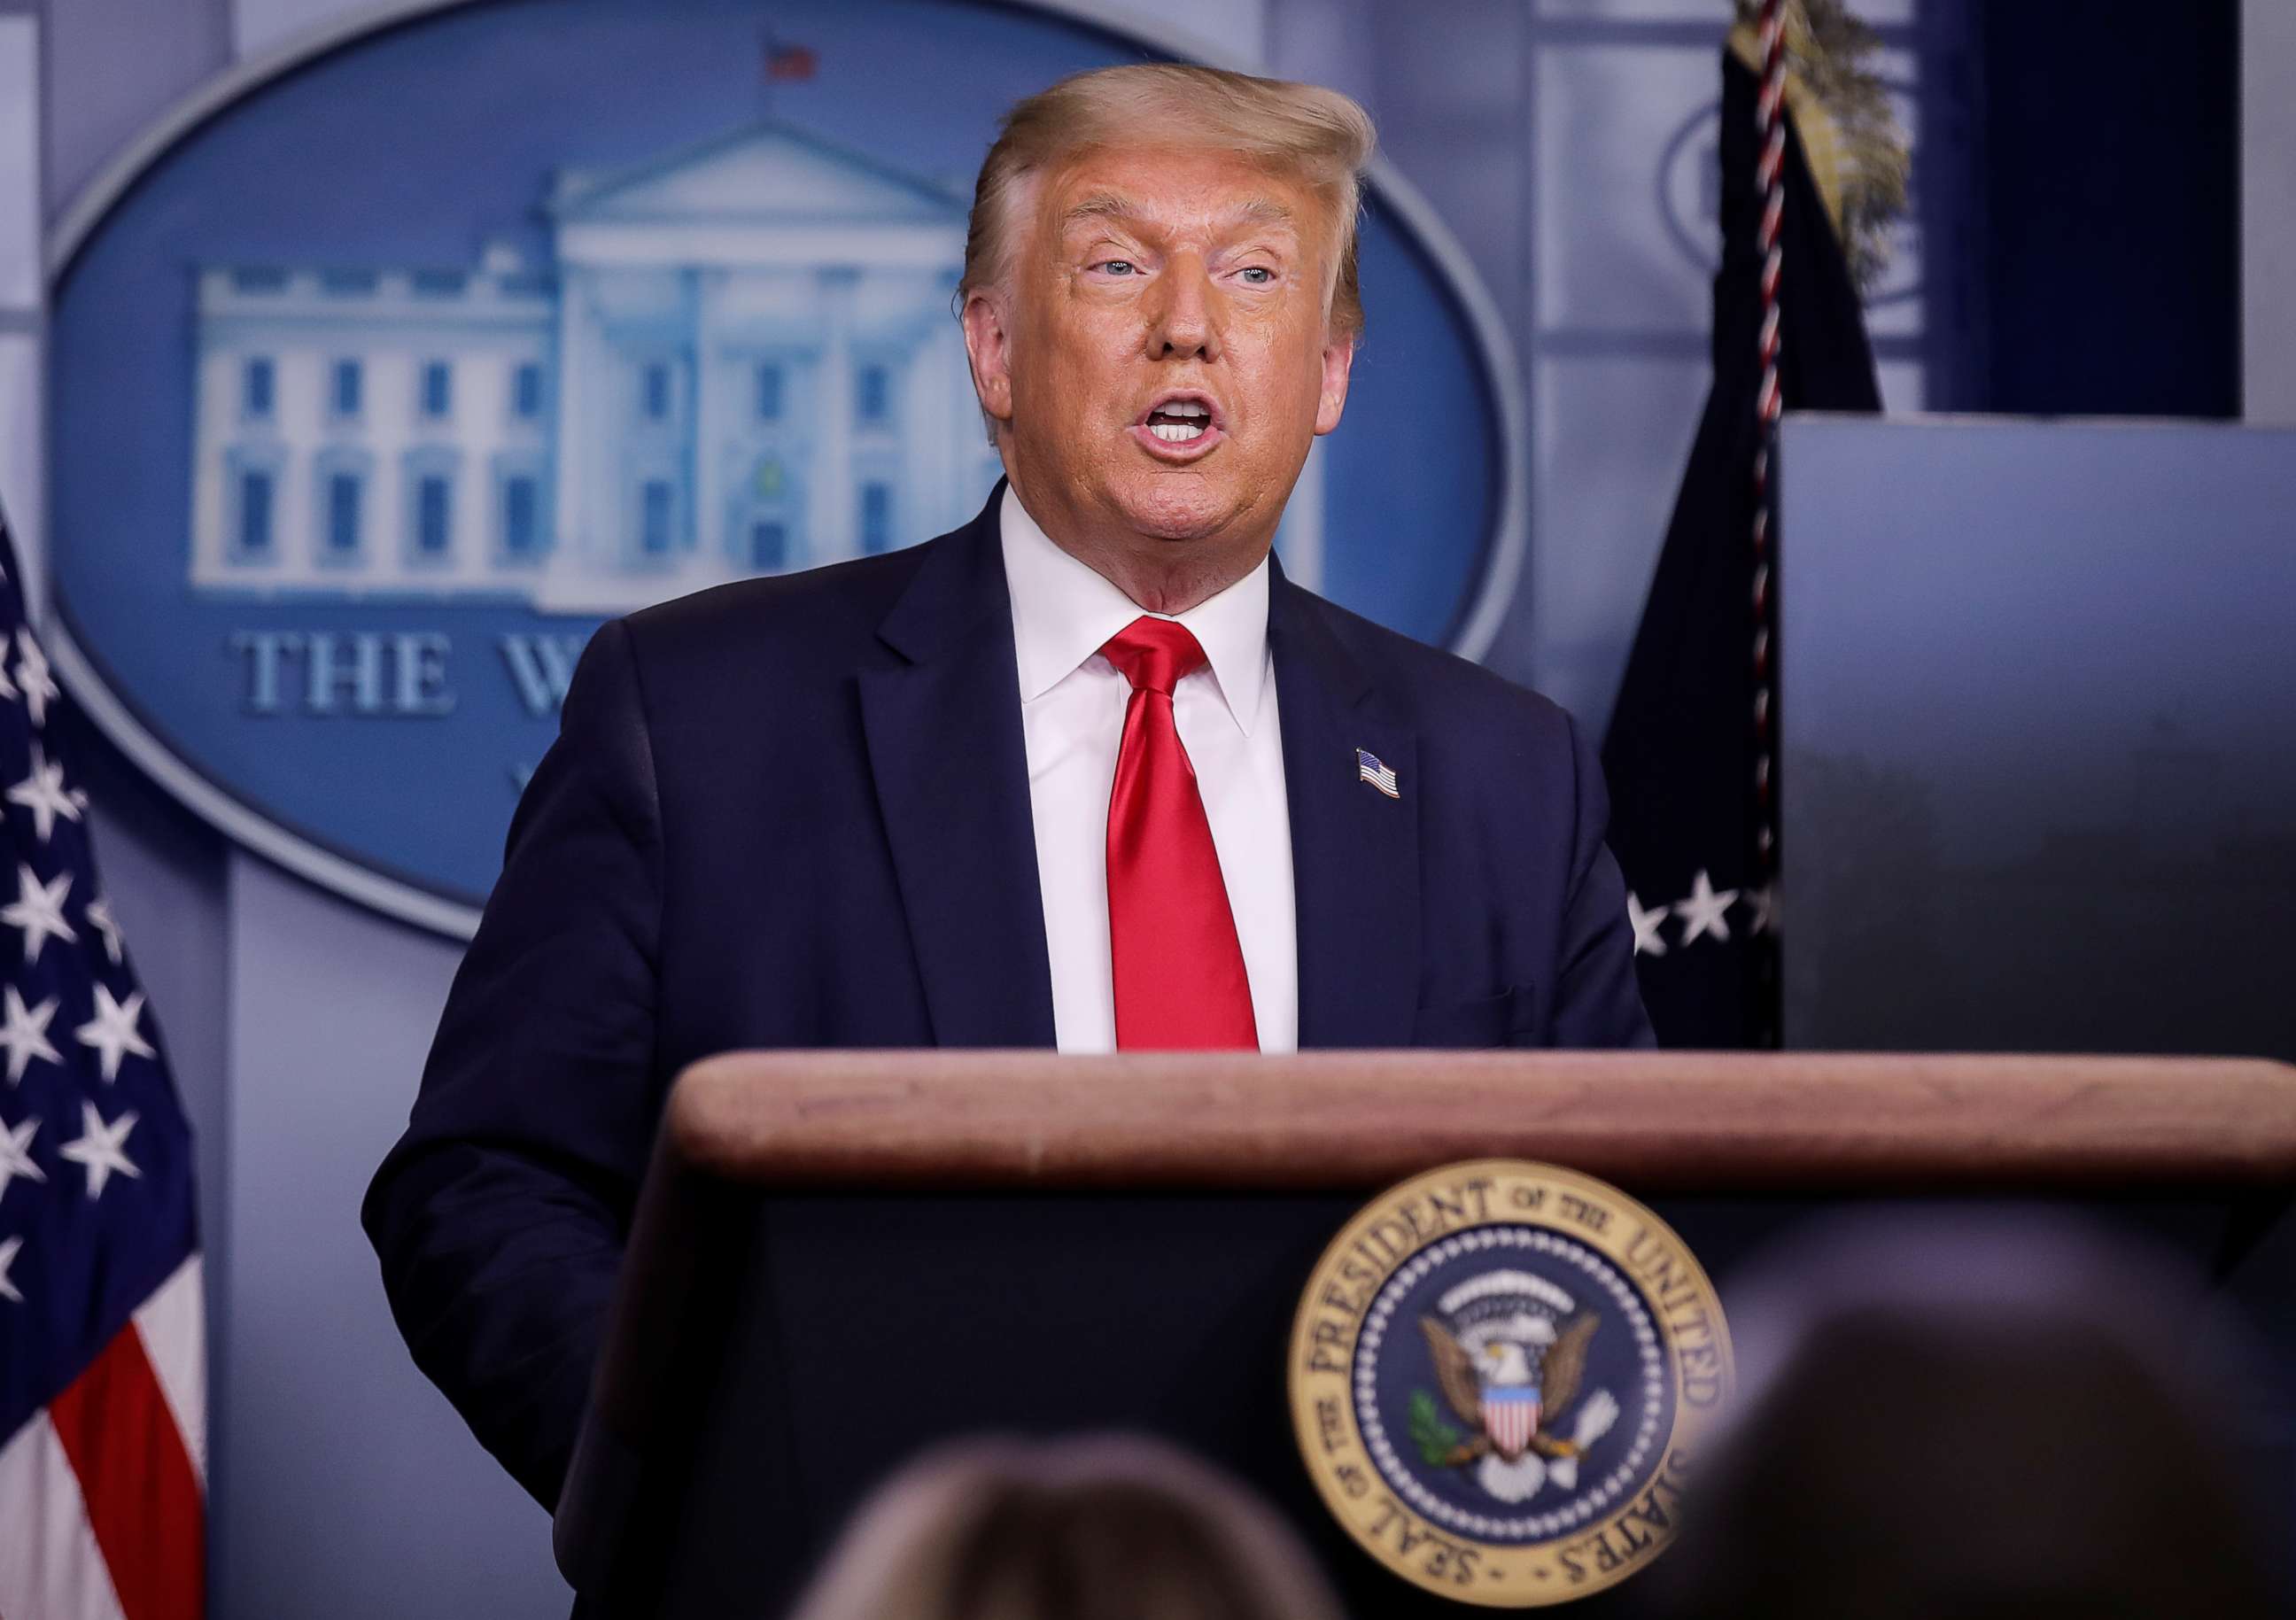 PHOTO: U.S. President Donald Trump speaks during a coronavirus disease (COVID-19) task force news briefing at the White House in Washington, July 28, 2020.